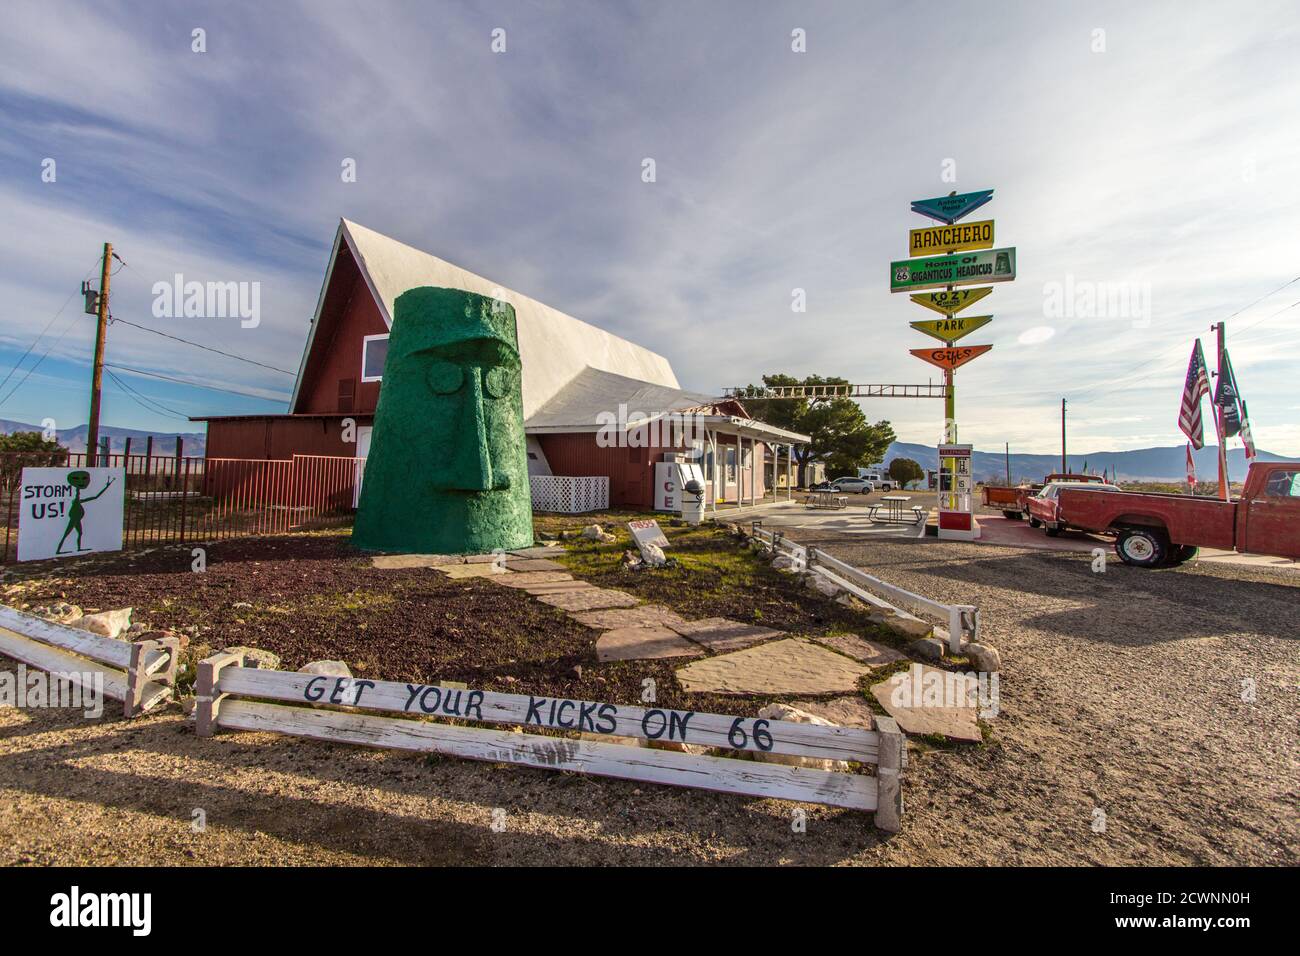 Walapai, Arizona, USA - Roadside landmark Giganticus Headicus at a small gas station and general store along historic Route 66 in the Arizona desert. Stock Photo